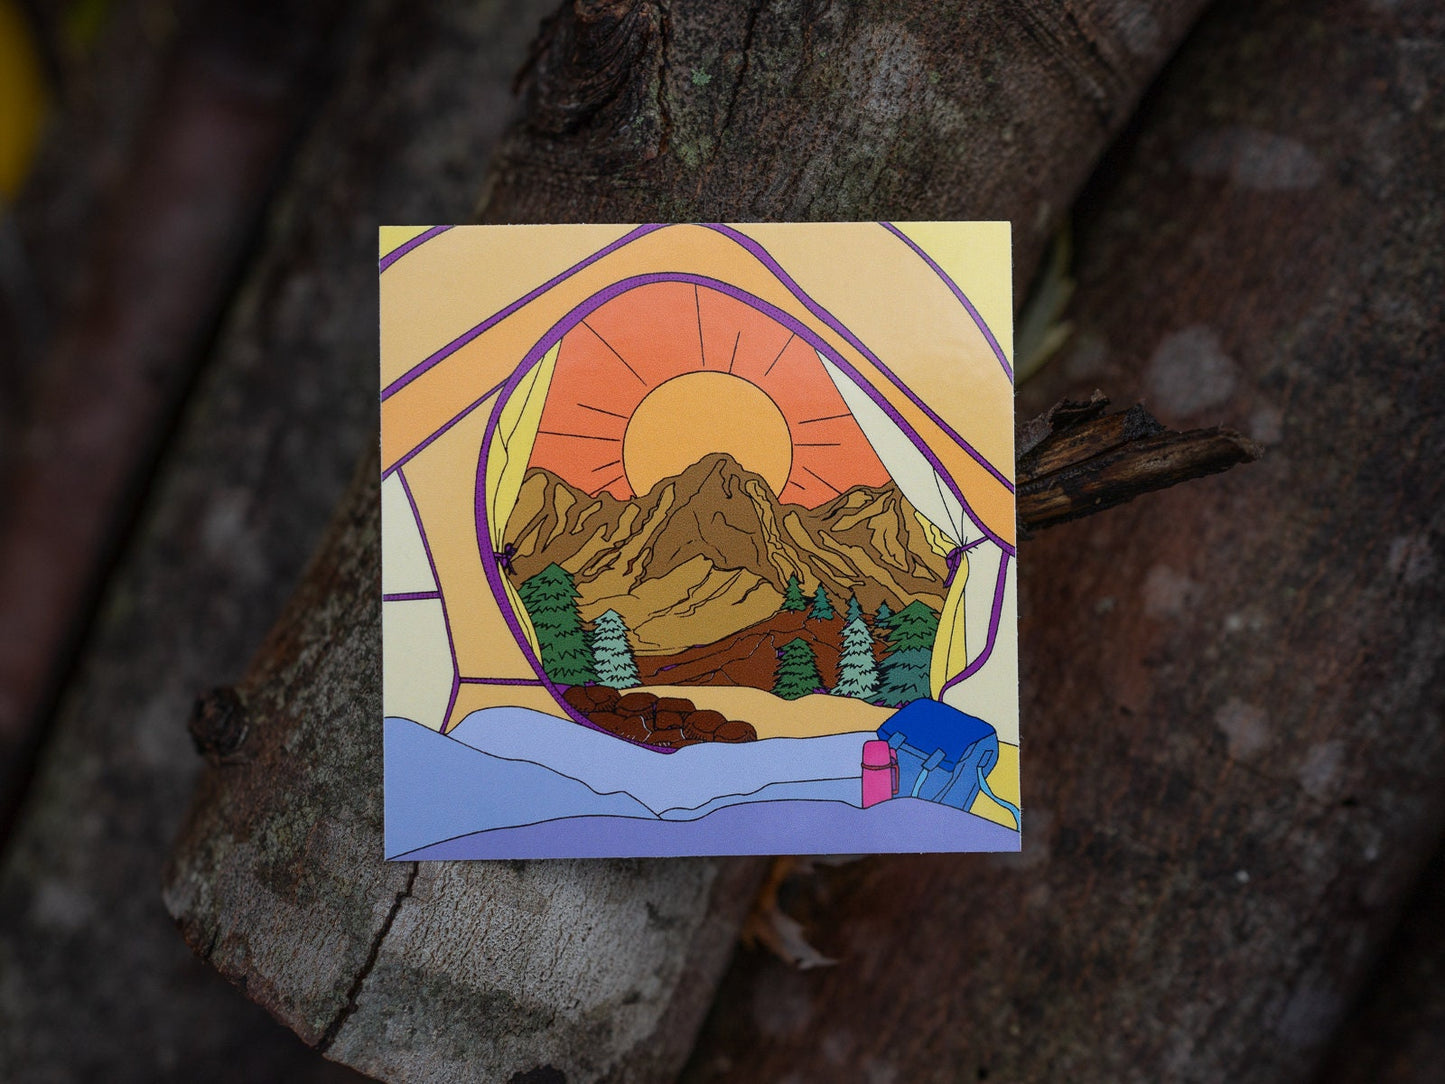 Morning VIew From the Tent Vinyl Sticker, Vinyl Decal, Laptop Sticker, Camping Sticker, Gifts For Campers, RV Life